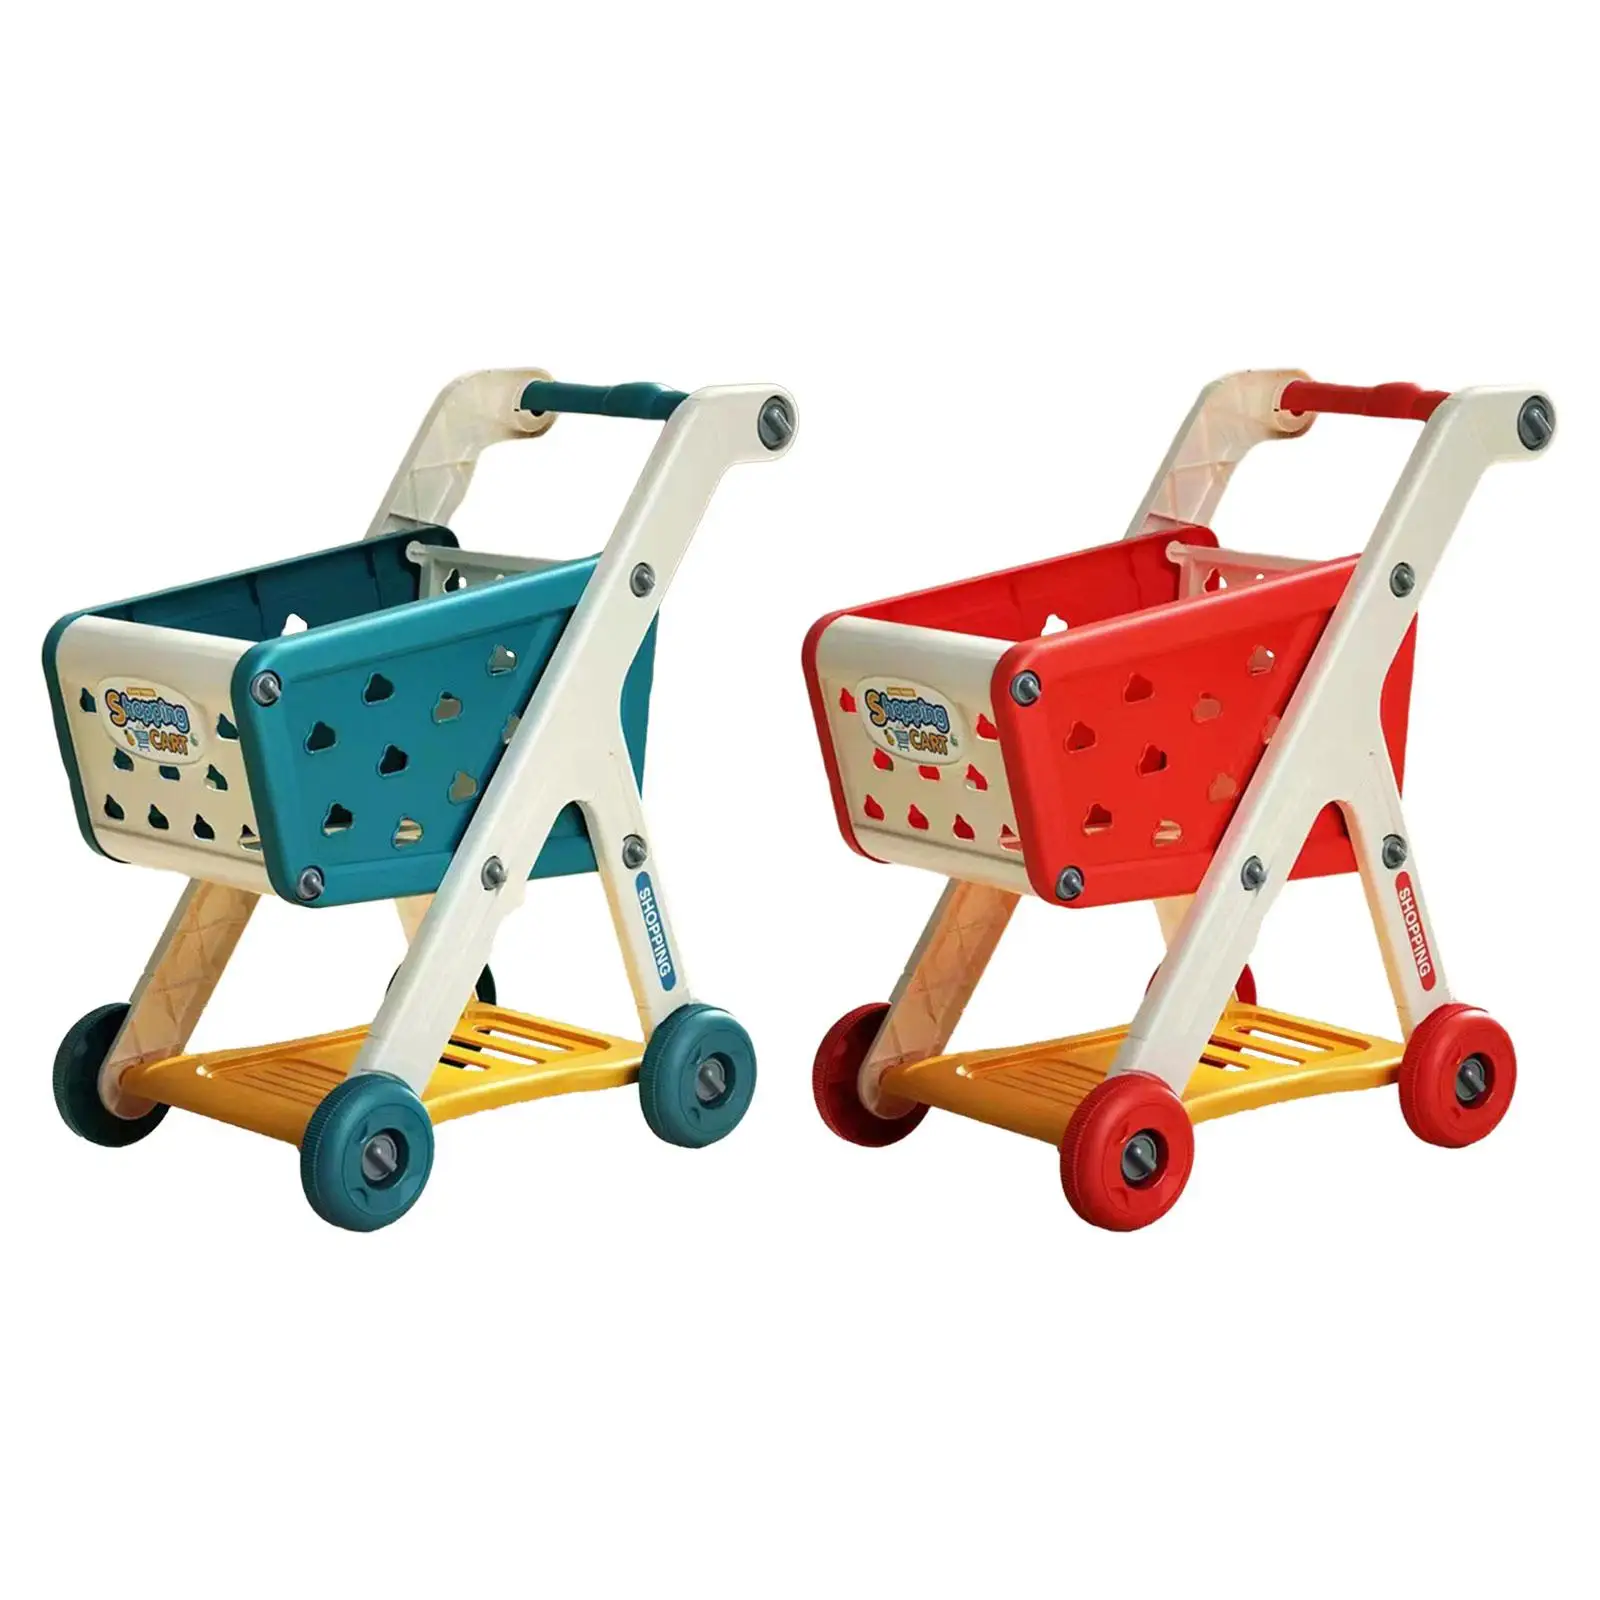 Kids Shopping Cart Toy Funny Easy to Push Simulation Shopping Trolley Toy for Baby Ages 3 and up Preschool Creative Toys